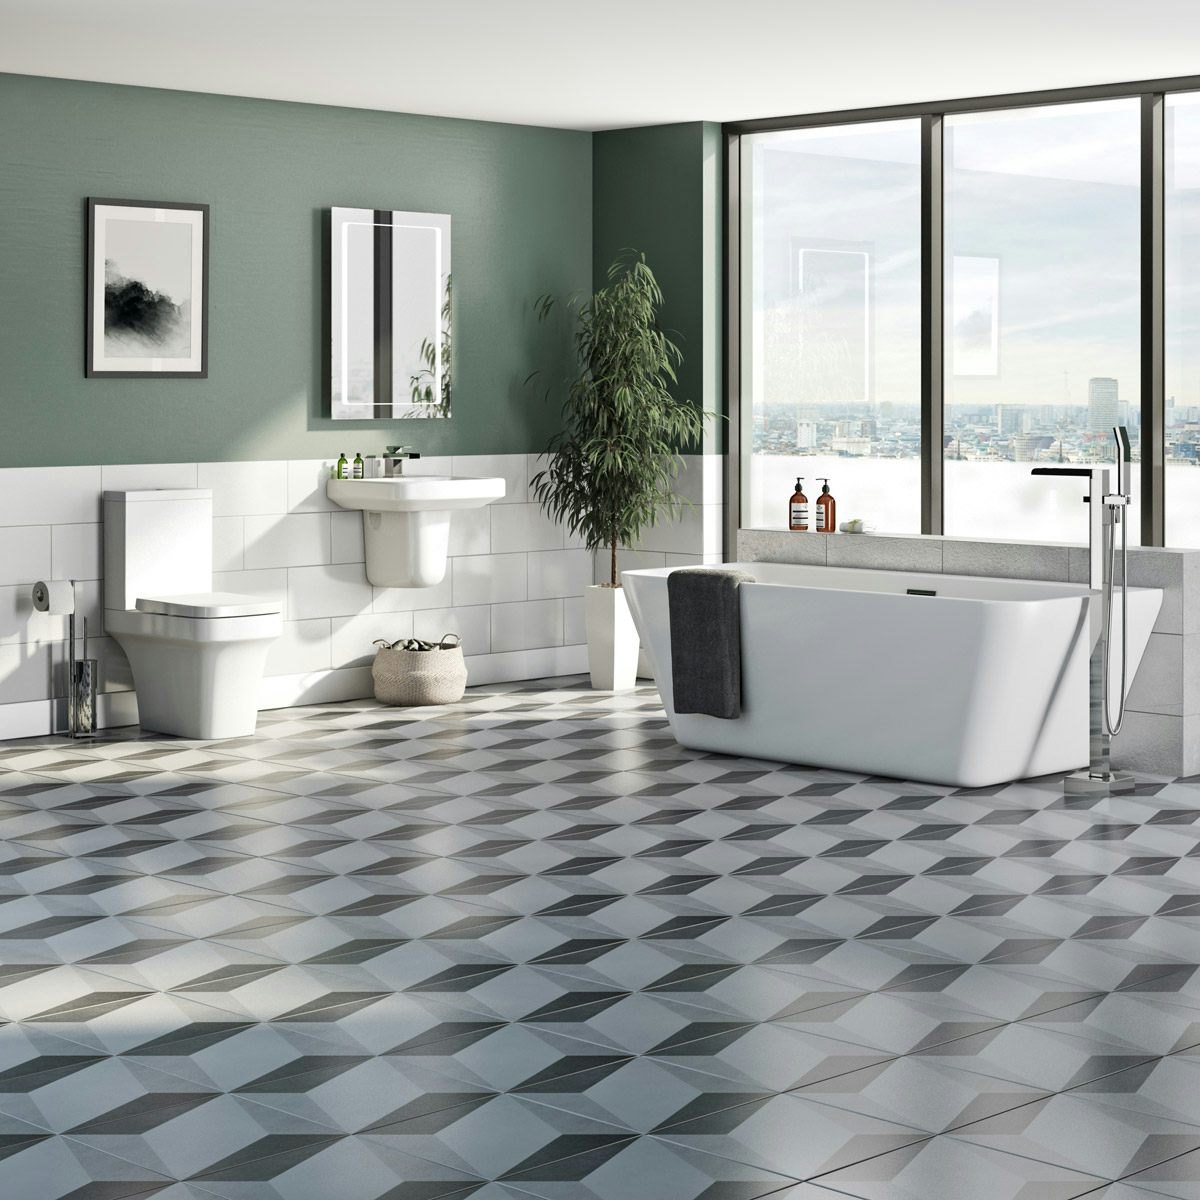 Mode Carter complete freestanding bath suite with taps and wastes |  VictoriaPlum.com